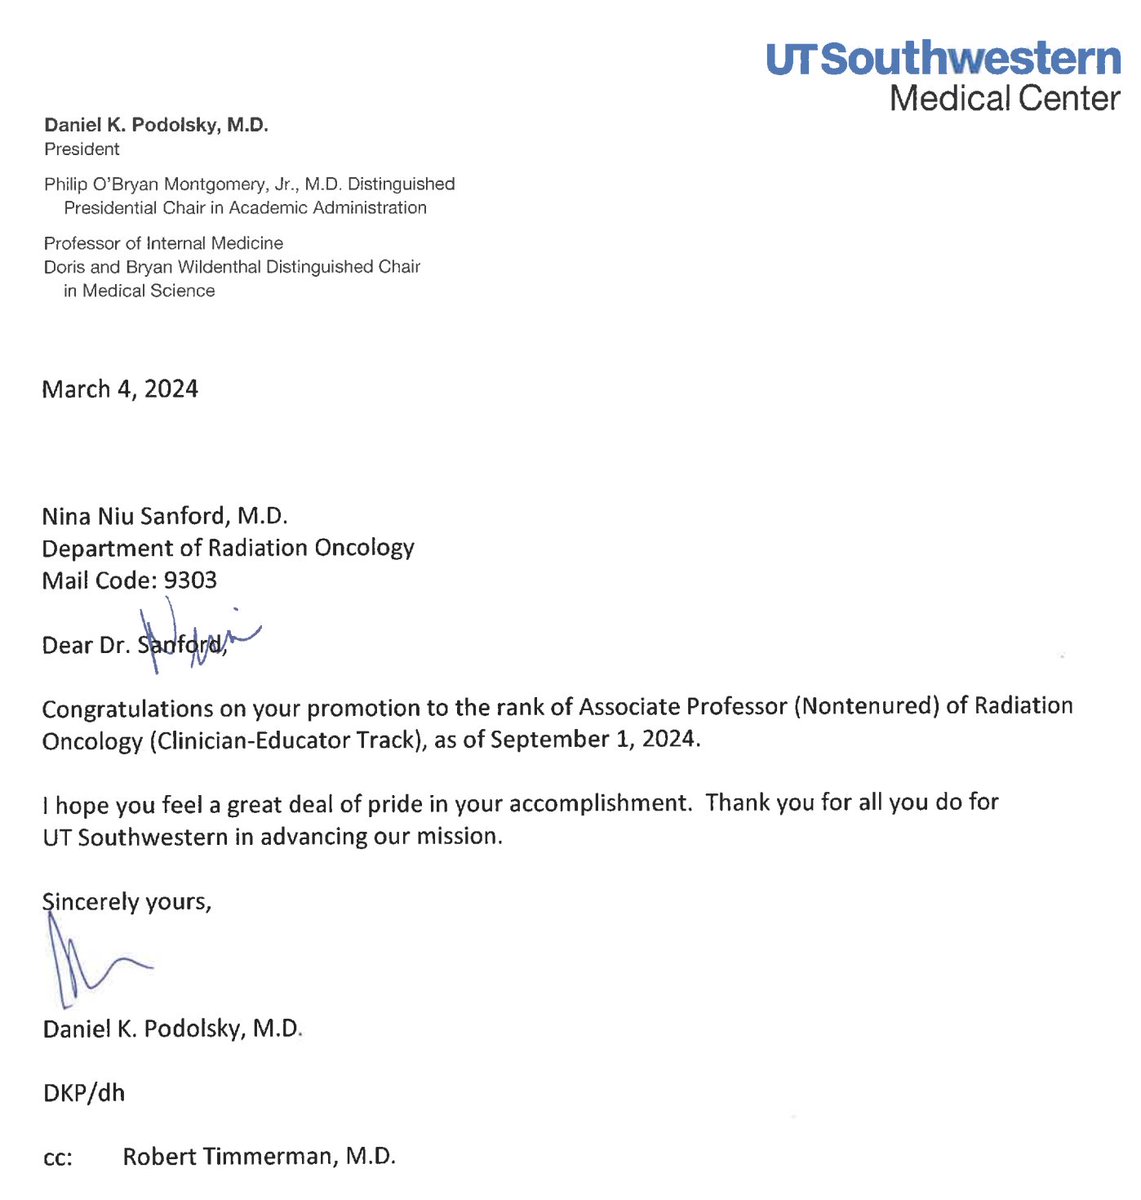 Happy to share that I have been promoted to Associate Professor! 😀 Getting to practice academic medicine is a privilege in many ways. I am grateful to my colleagues, mentors, patients, & family.